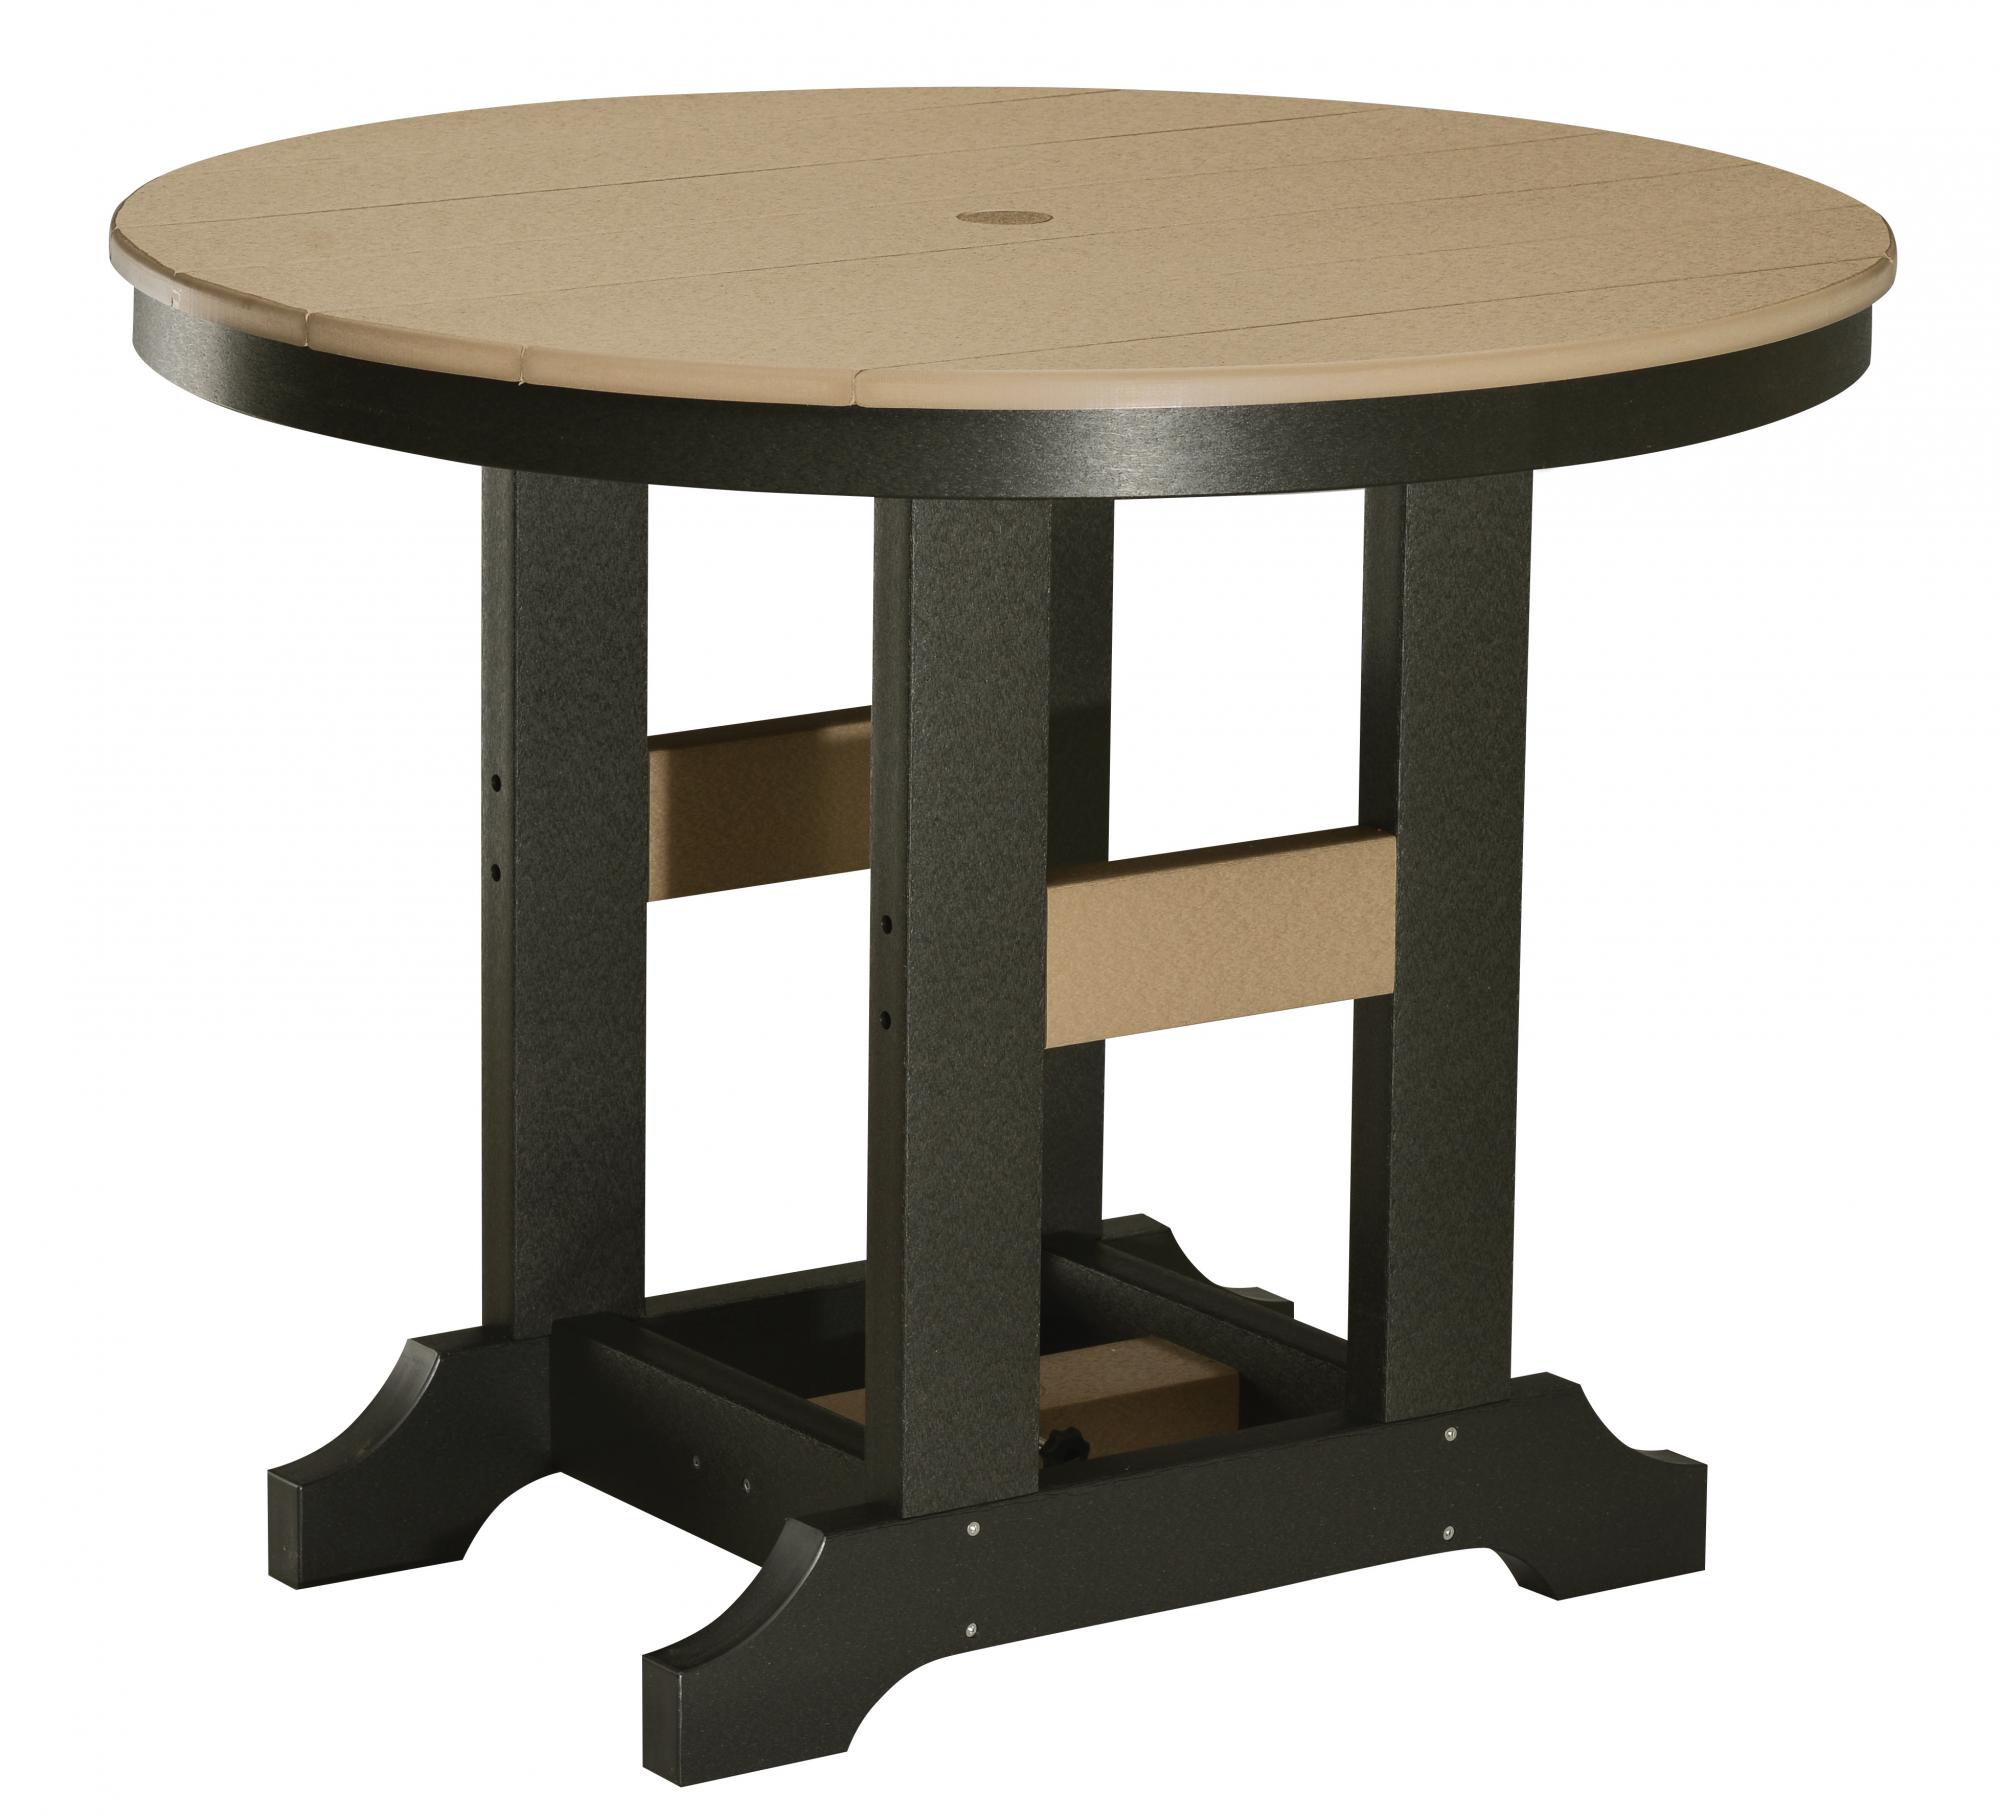 38 Inch Round Table